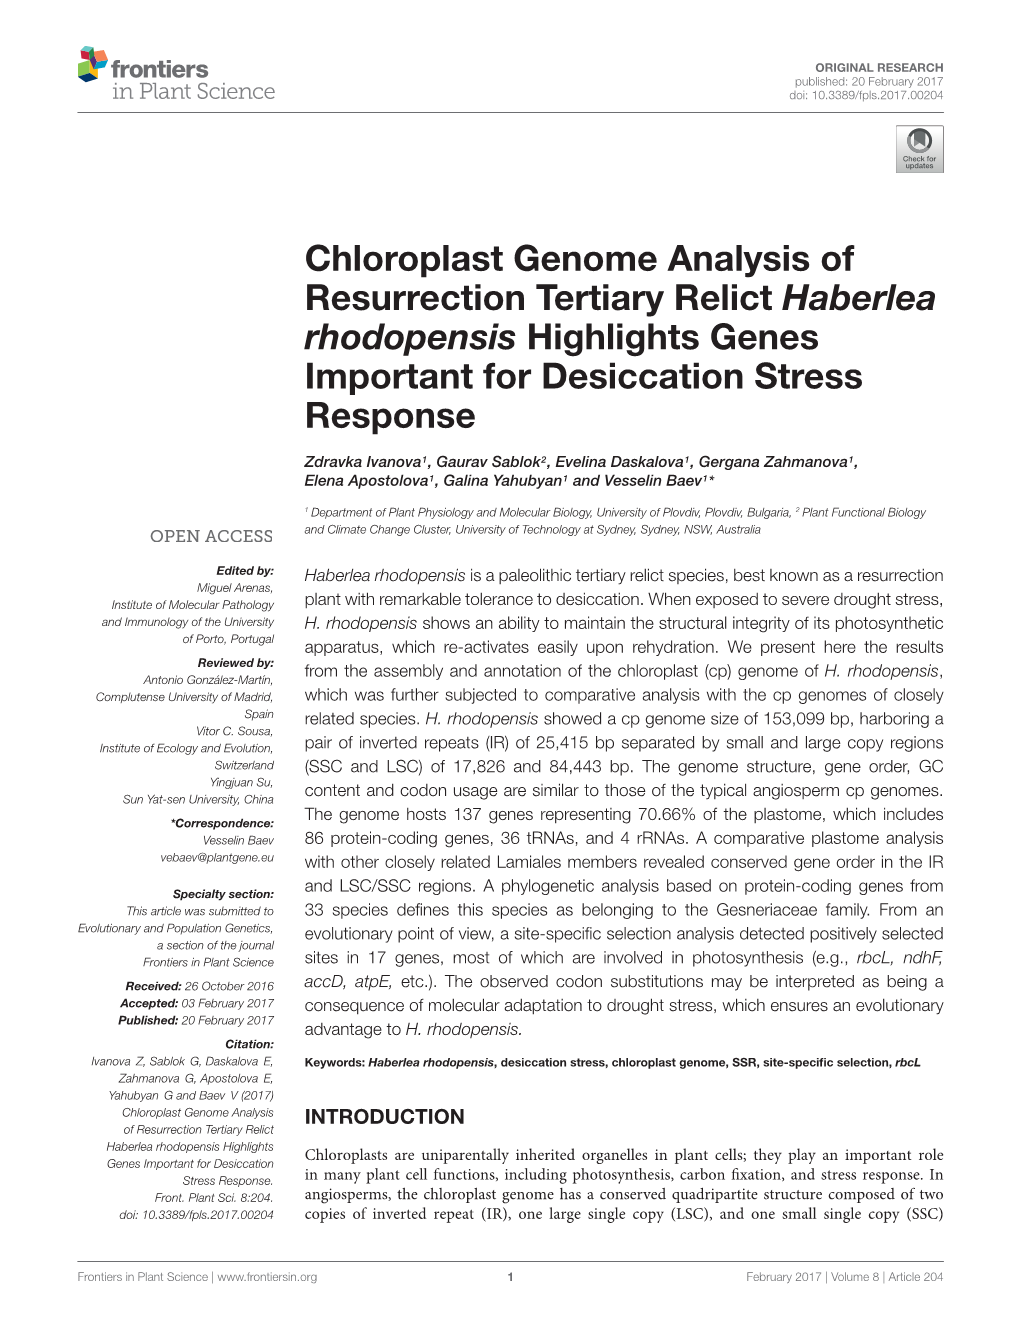 Chloroplast Genome Analysis of Resurrection Tertiary Relict Haberlea Rhodopensis Highlights Genes Important for Desiccation Stress Response